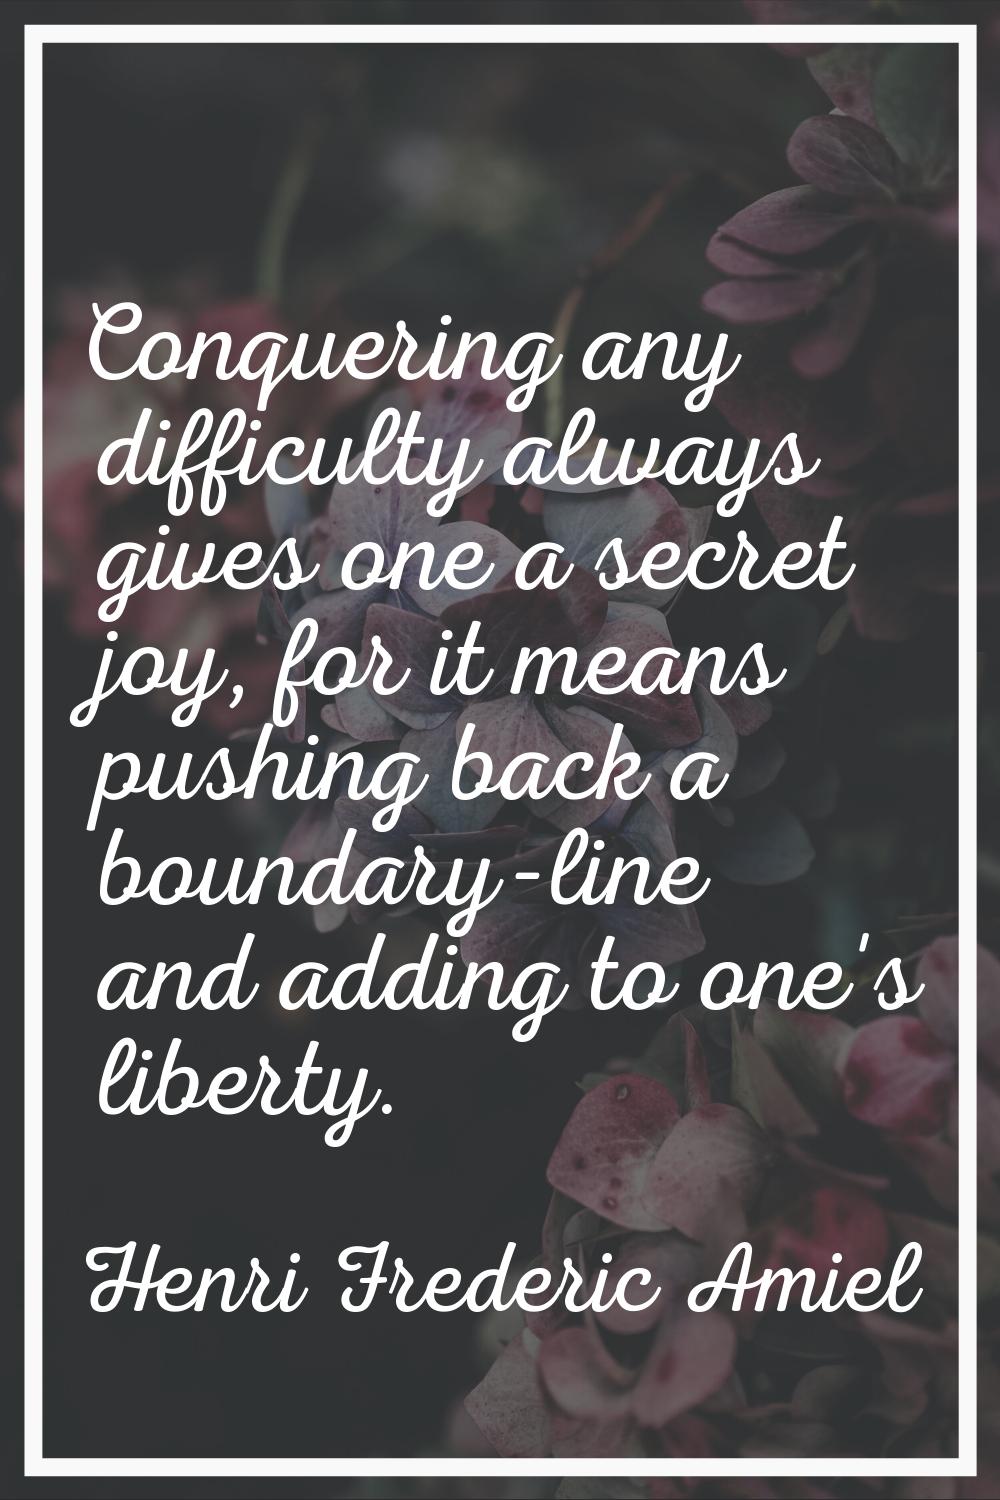 Conquering any difficulty always gives one a secret joy, for it means pushing back a boundary-line 